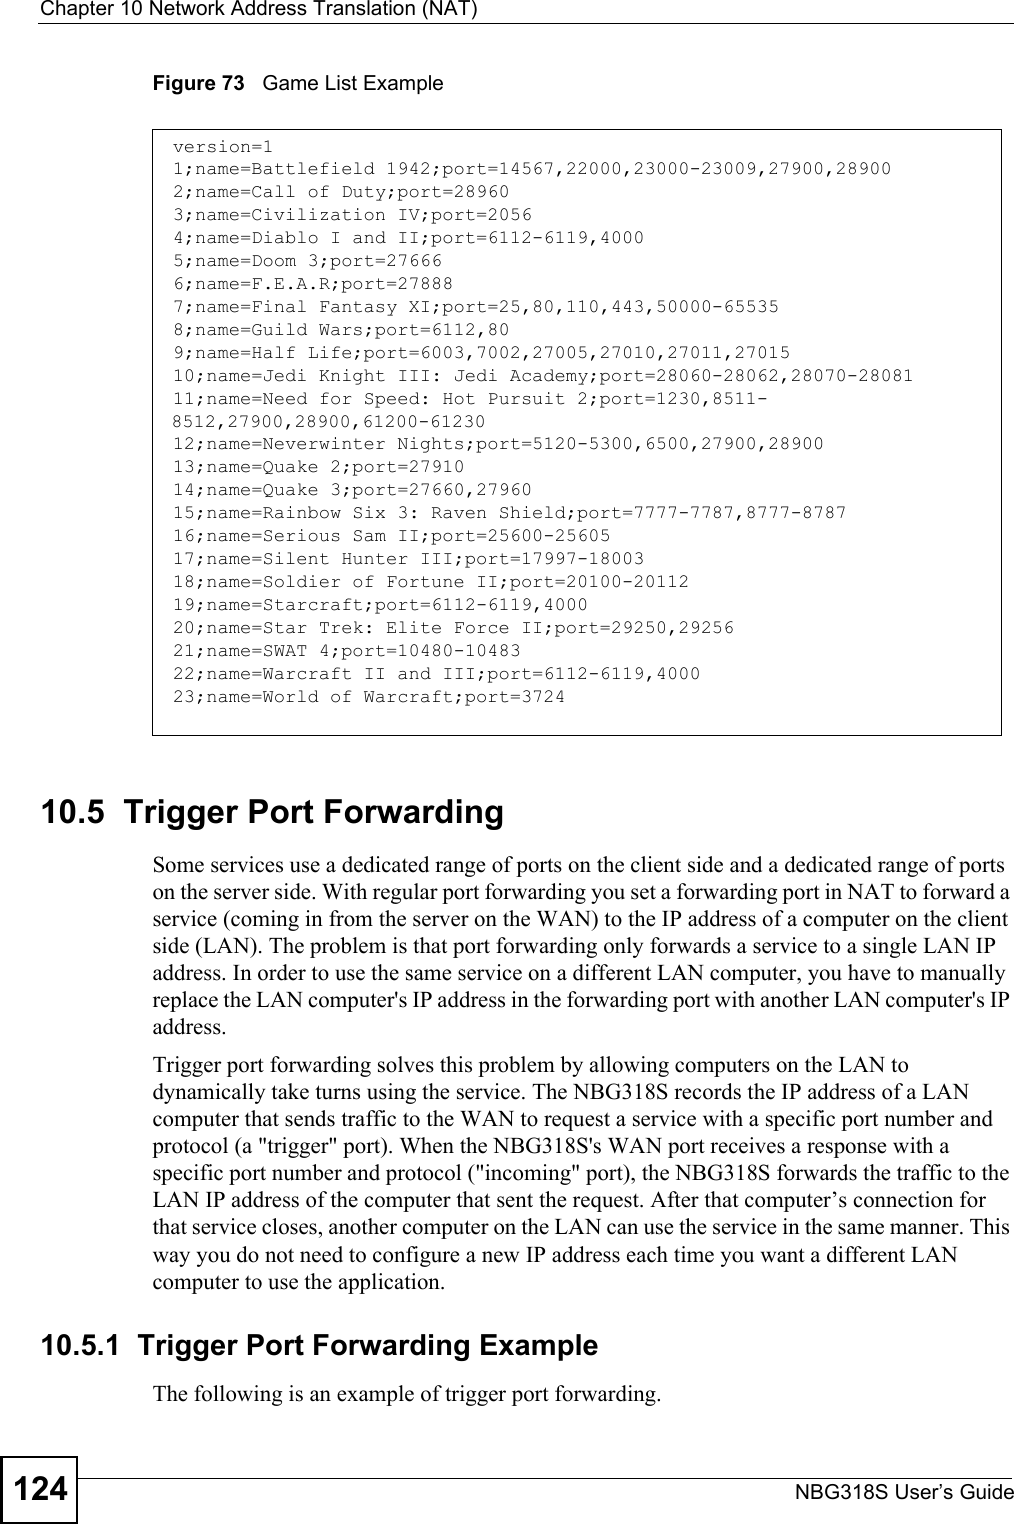 Chapter 10 Network Address Translation (NAT)NBG318S User’s Guide124Figure 73   Game List Example10.5  Trigger Port Forwarding Some services use a dedicated range of ports on the client side and a dedicated range of ports on the server side. With regular port forwarding you set a forwarding port in NAT to forward a service (coming in from the server on the WAN) to the IP address of a computer on the client side (LAN). The problem is that port forwarding only forwards a service to a single LAN IP address. In order to use the same service on a different LAN computer, you have to manually replace the LAN computer&apos;s IP address in the forwarding port with another LAN computer&apos;s IP address. Trigger port forwarding solves this problem by allowing computers on the LAN to dynamically take turns using the service. The NBG318S records the IP address of a LAN computer that sends traffic to the WAN to request a service with a specific port number and protocol (a &quot;trigger&quot; port). When the NBG318S&apos;s WAN port receives a response with a specific port number and protocol (&quot;incoming&quot; port), the NBG318S forwards the traffic to the LAN IP address of the computer that sent the request. After that computer’s connection for that service closes, another computer on the LAN can use the service in the same manner. This way you do not need to configure a new IP address each time you want a different LAN computer to use the application.10.5.1  Trigger Port Forwarding Example The following is an example of trigger port forwarding.version=11;name=Battlefield 1942;port=14567,22000,23000-23009,27900,289002;name=Call of Duty;port=289603;name=Civilization IV;port=20564;name=Diablo I and II;port=6112-6119,40005;name=Doom 3;port=276666;name=F.E.A.R;port=278887;name=Final Fantasy XI;port=25,80,110,443,50000-655358;name=Guild Wars;port=6112,809;name=Half Life;port=6003,7002,27005,27010,27011,2701510;name=Jedi Knight III: Jedi Academy;port=28060-28062,28070-2808111;name=Need for Speed: Hot Pursuit 2;port=1230,8511-8512,27900,28900,61200-6123012;name=Neverwinter Nights;port=5120-5300,6500,27900,2890013;name=Quake 2;port=2791014;name=Quake 3;port=27660,2796015;name=Rainbow Six 3: Raven Shield;port=7777-7787,8777-878716;name=Serious Sam II;port=25600-2560517;name=Silent Hunter III;port=17997-1800318;name=Soldier of Fortune II;port=20100-2011219;name=Starcraft;port=6112-6119,400020;name=Star Trek: Elite Force II;port=29250,2925621;name=SWAT 4;port=10480-1048322;name=Warcraft II and III;port=6112-6119,400023;name=World of Warcraft;port=3724